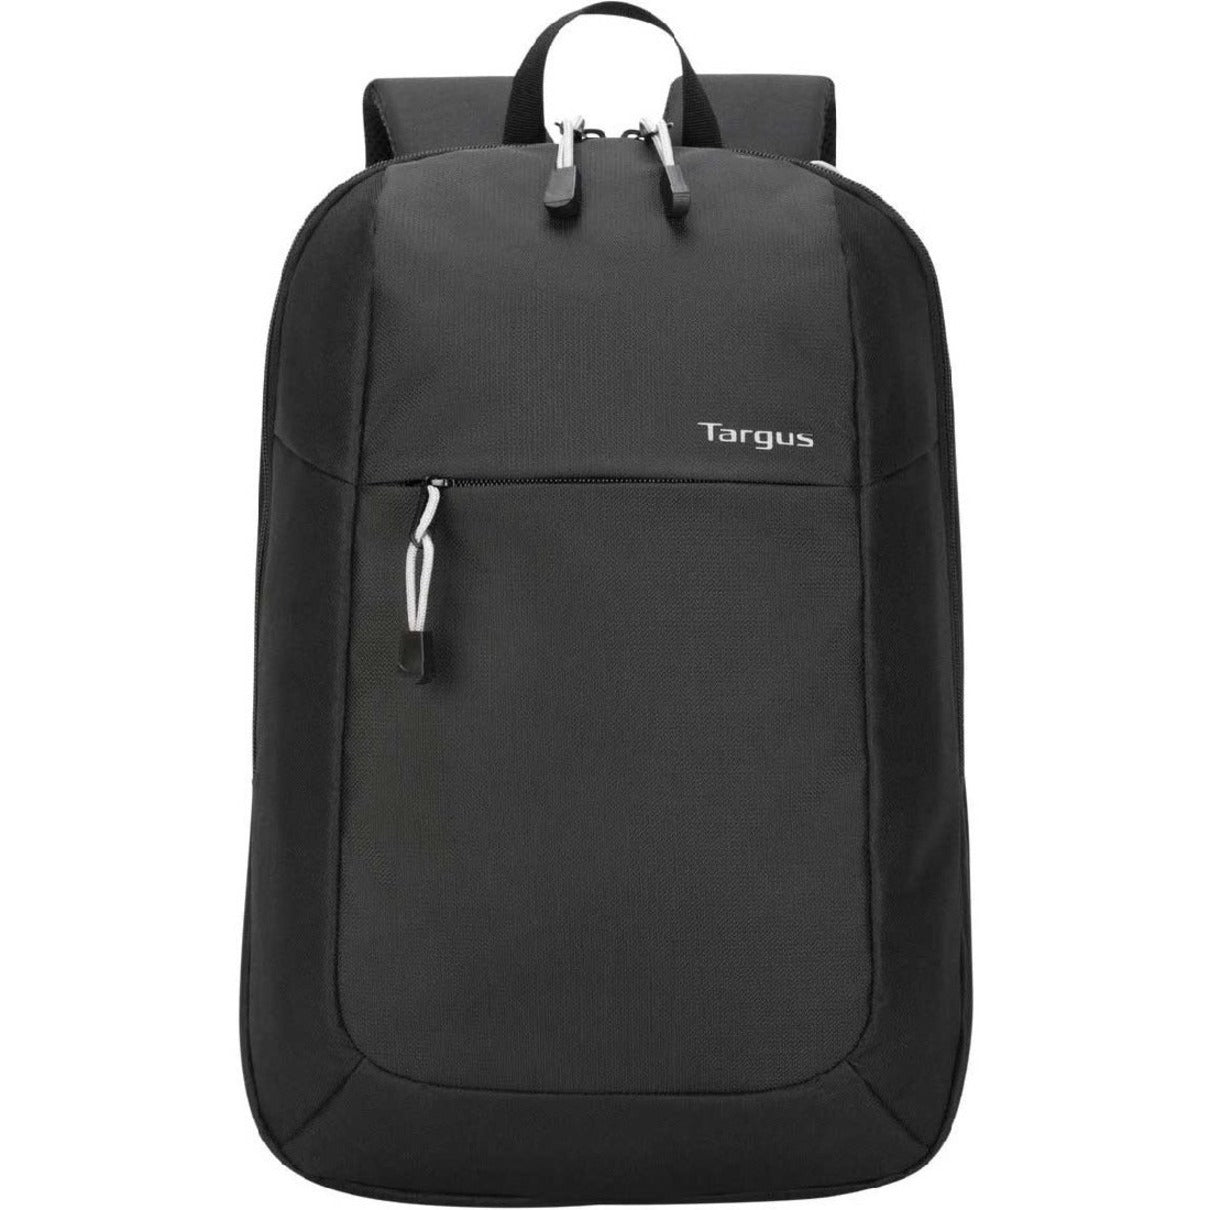 Targus Intellect TSB966GL Carrying Case (Backpack) for 15.6" Notebook - Black (TSB966GL) Front image